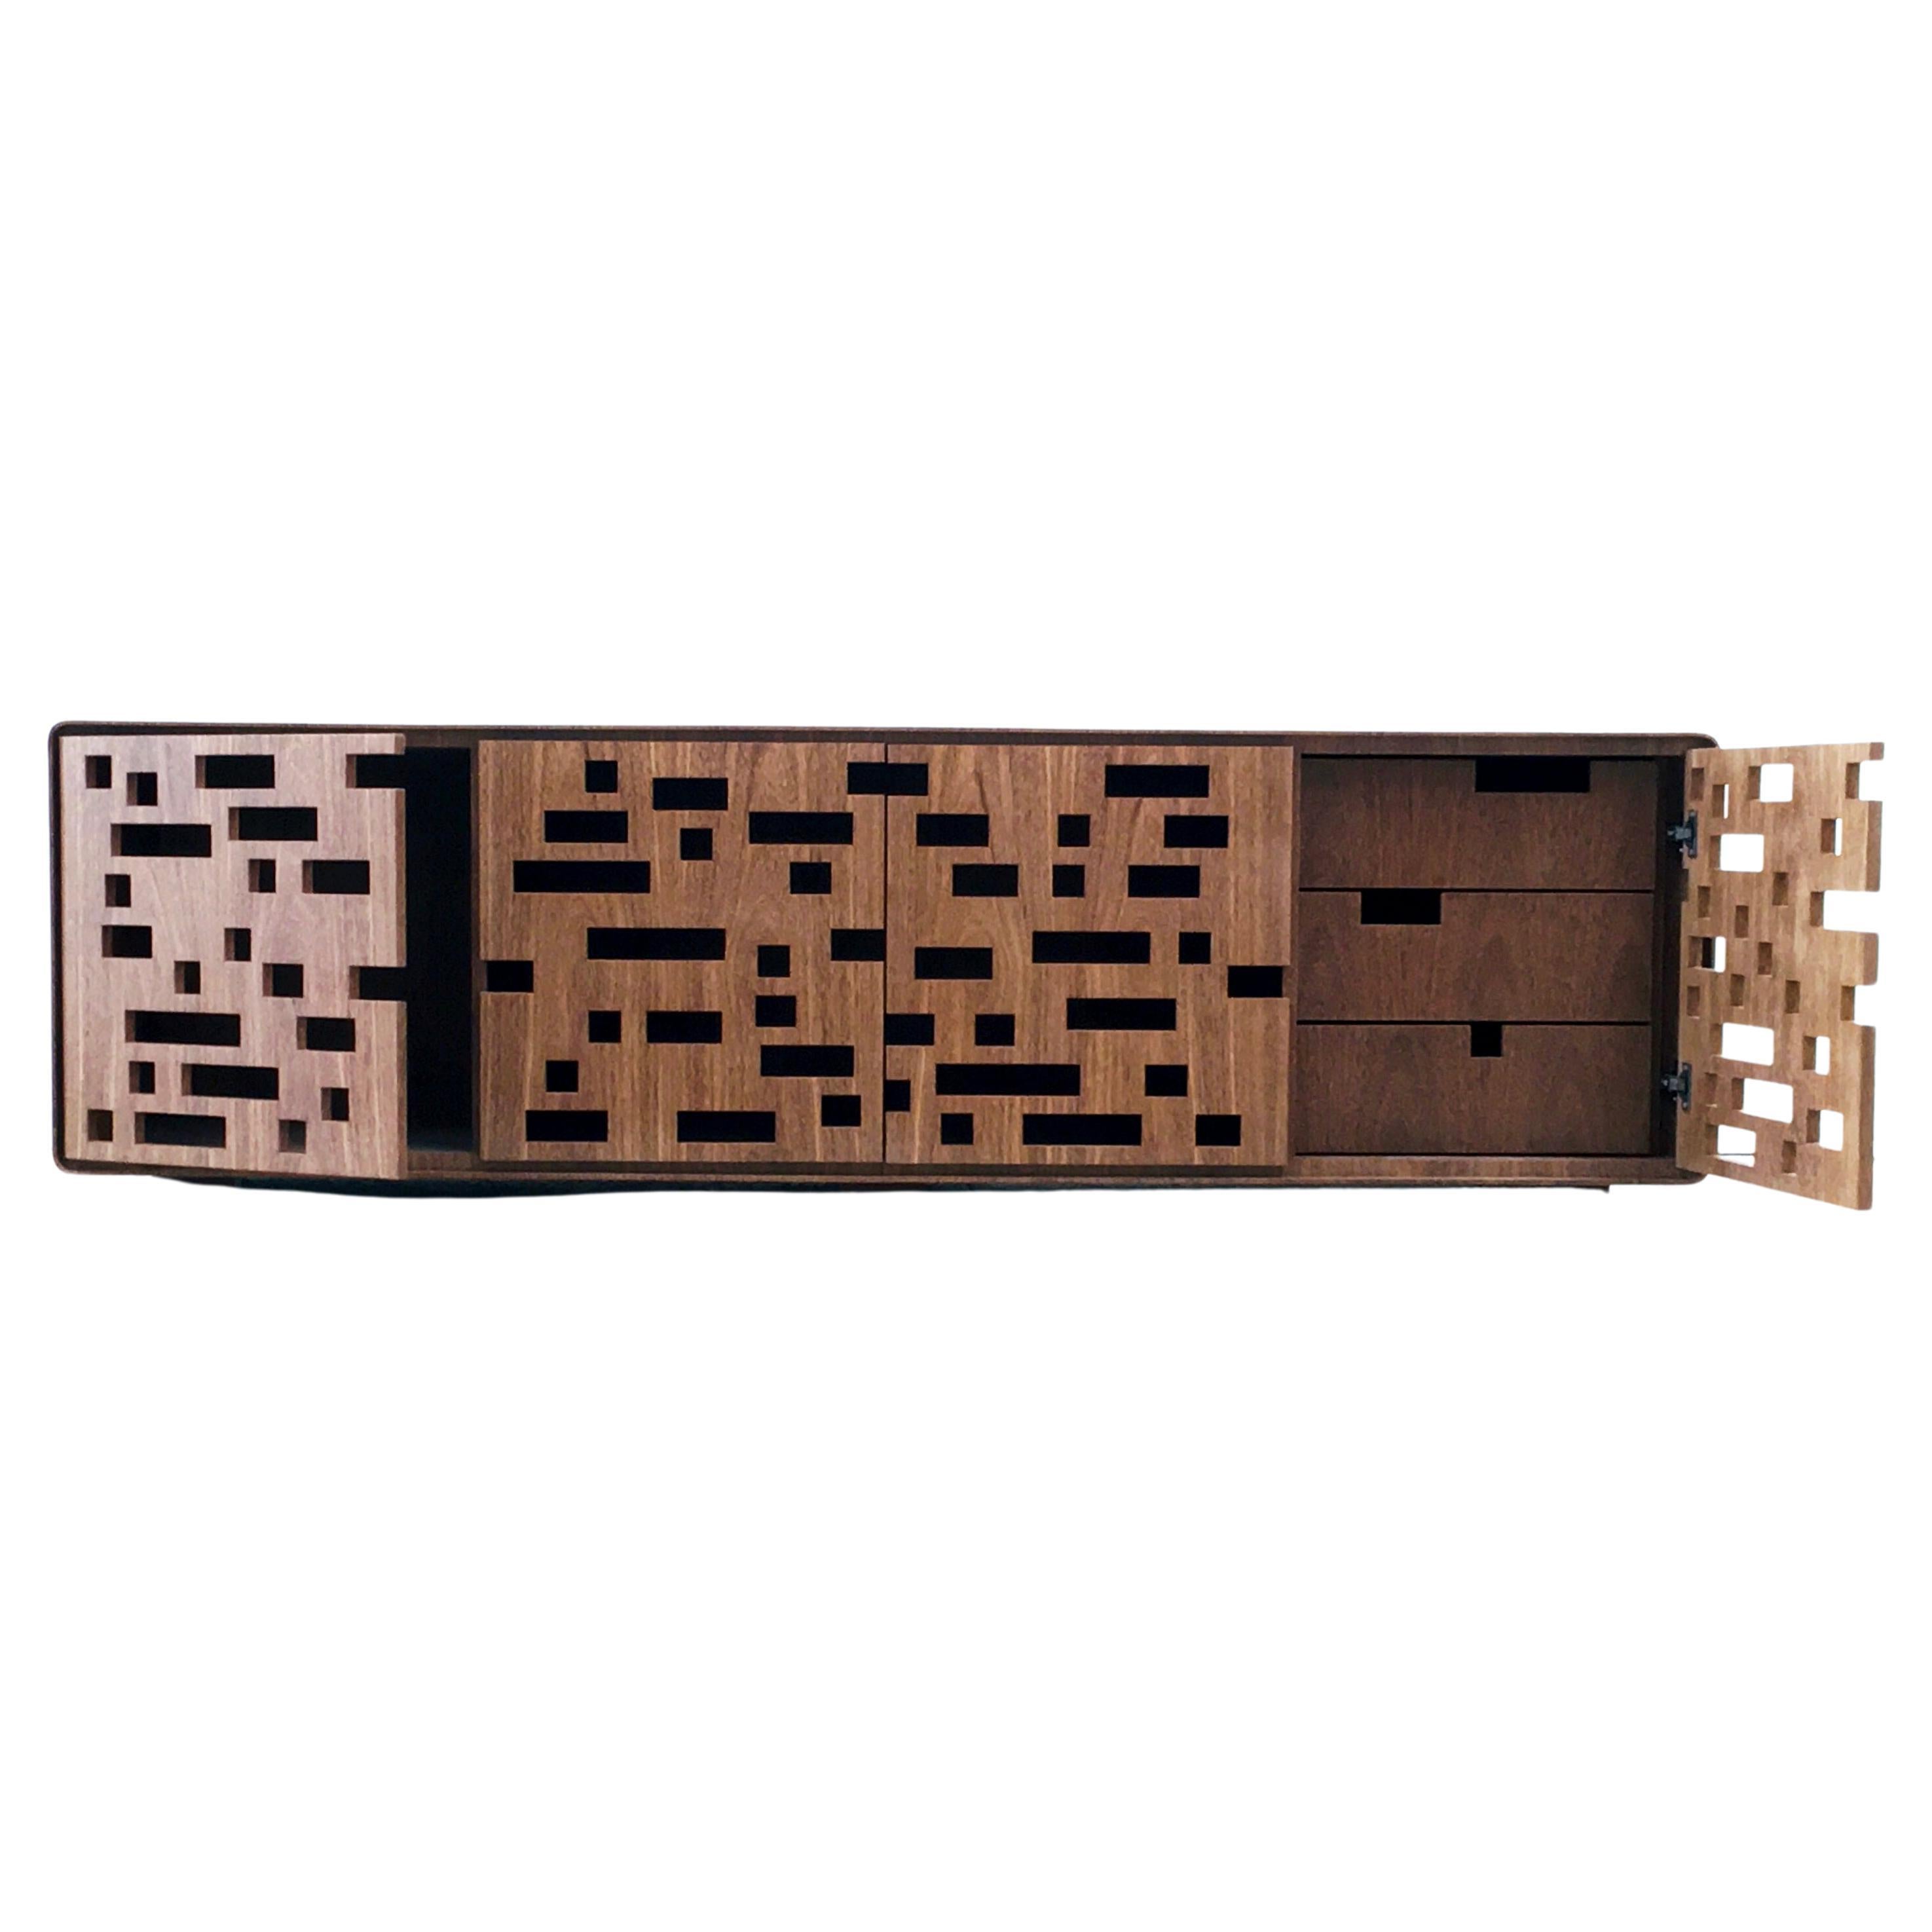 Contemporary Sideboard, by Leo Strauss Handcrafted Buffet 